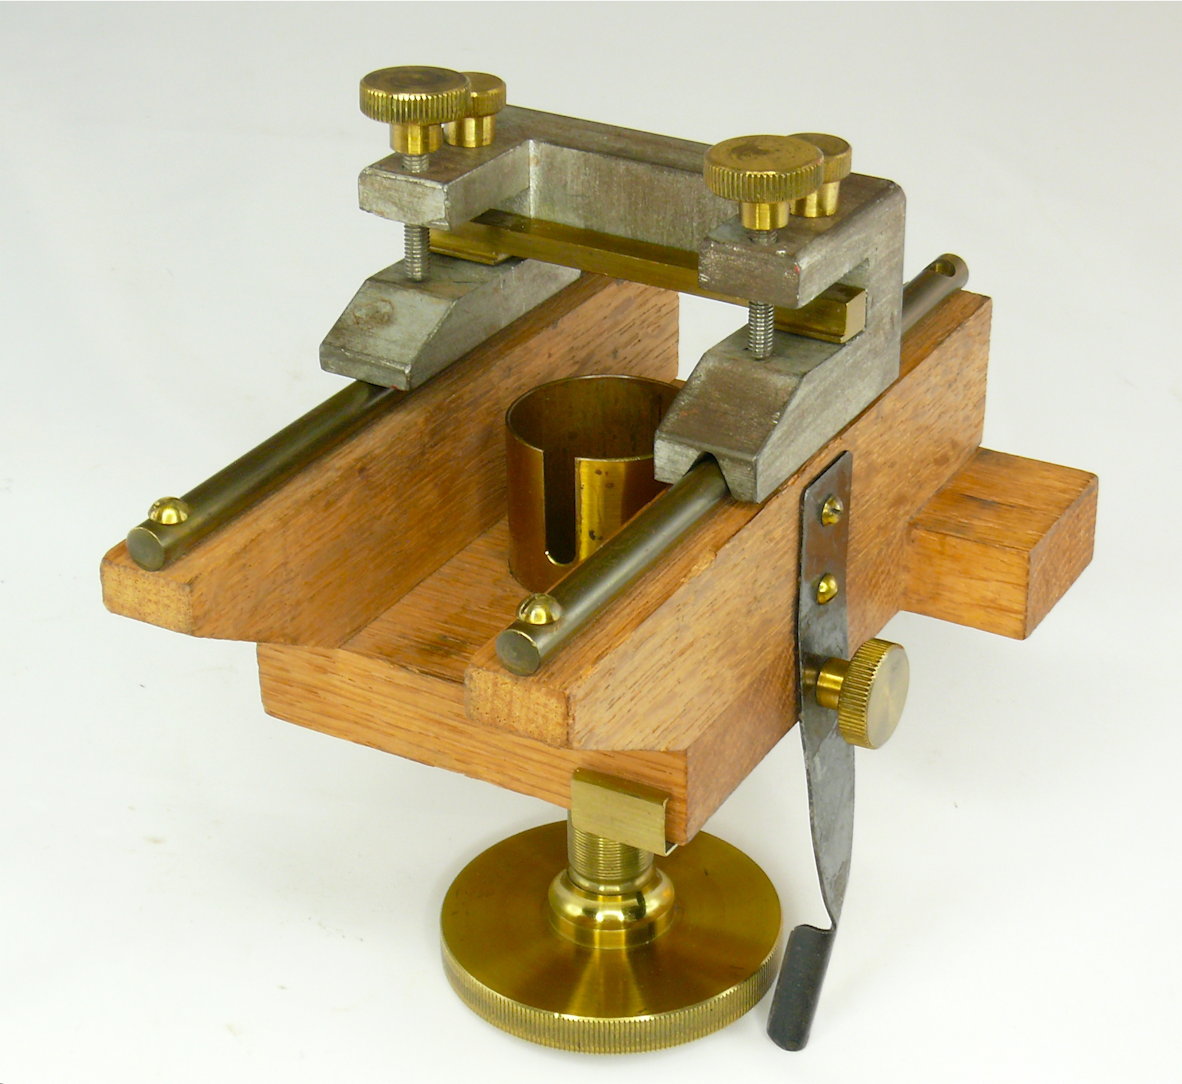 Microtome à glissière
(type Cathcart)